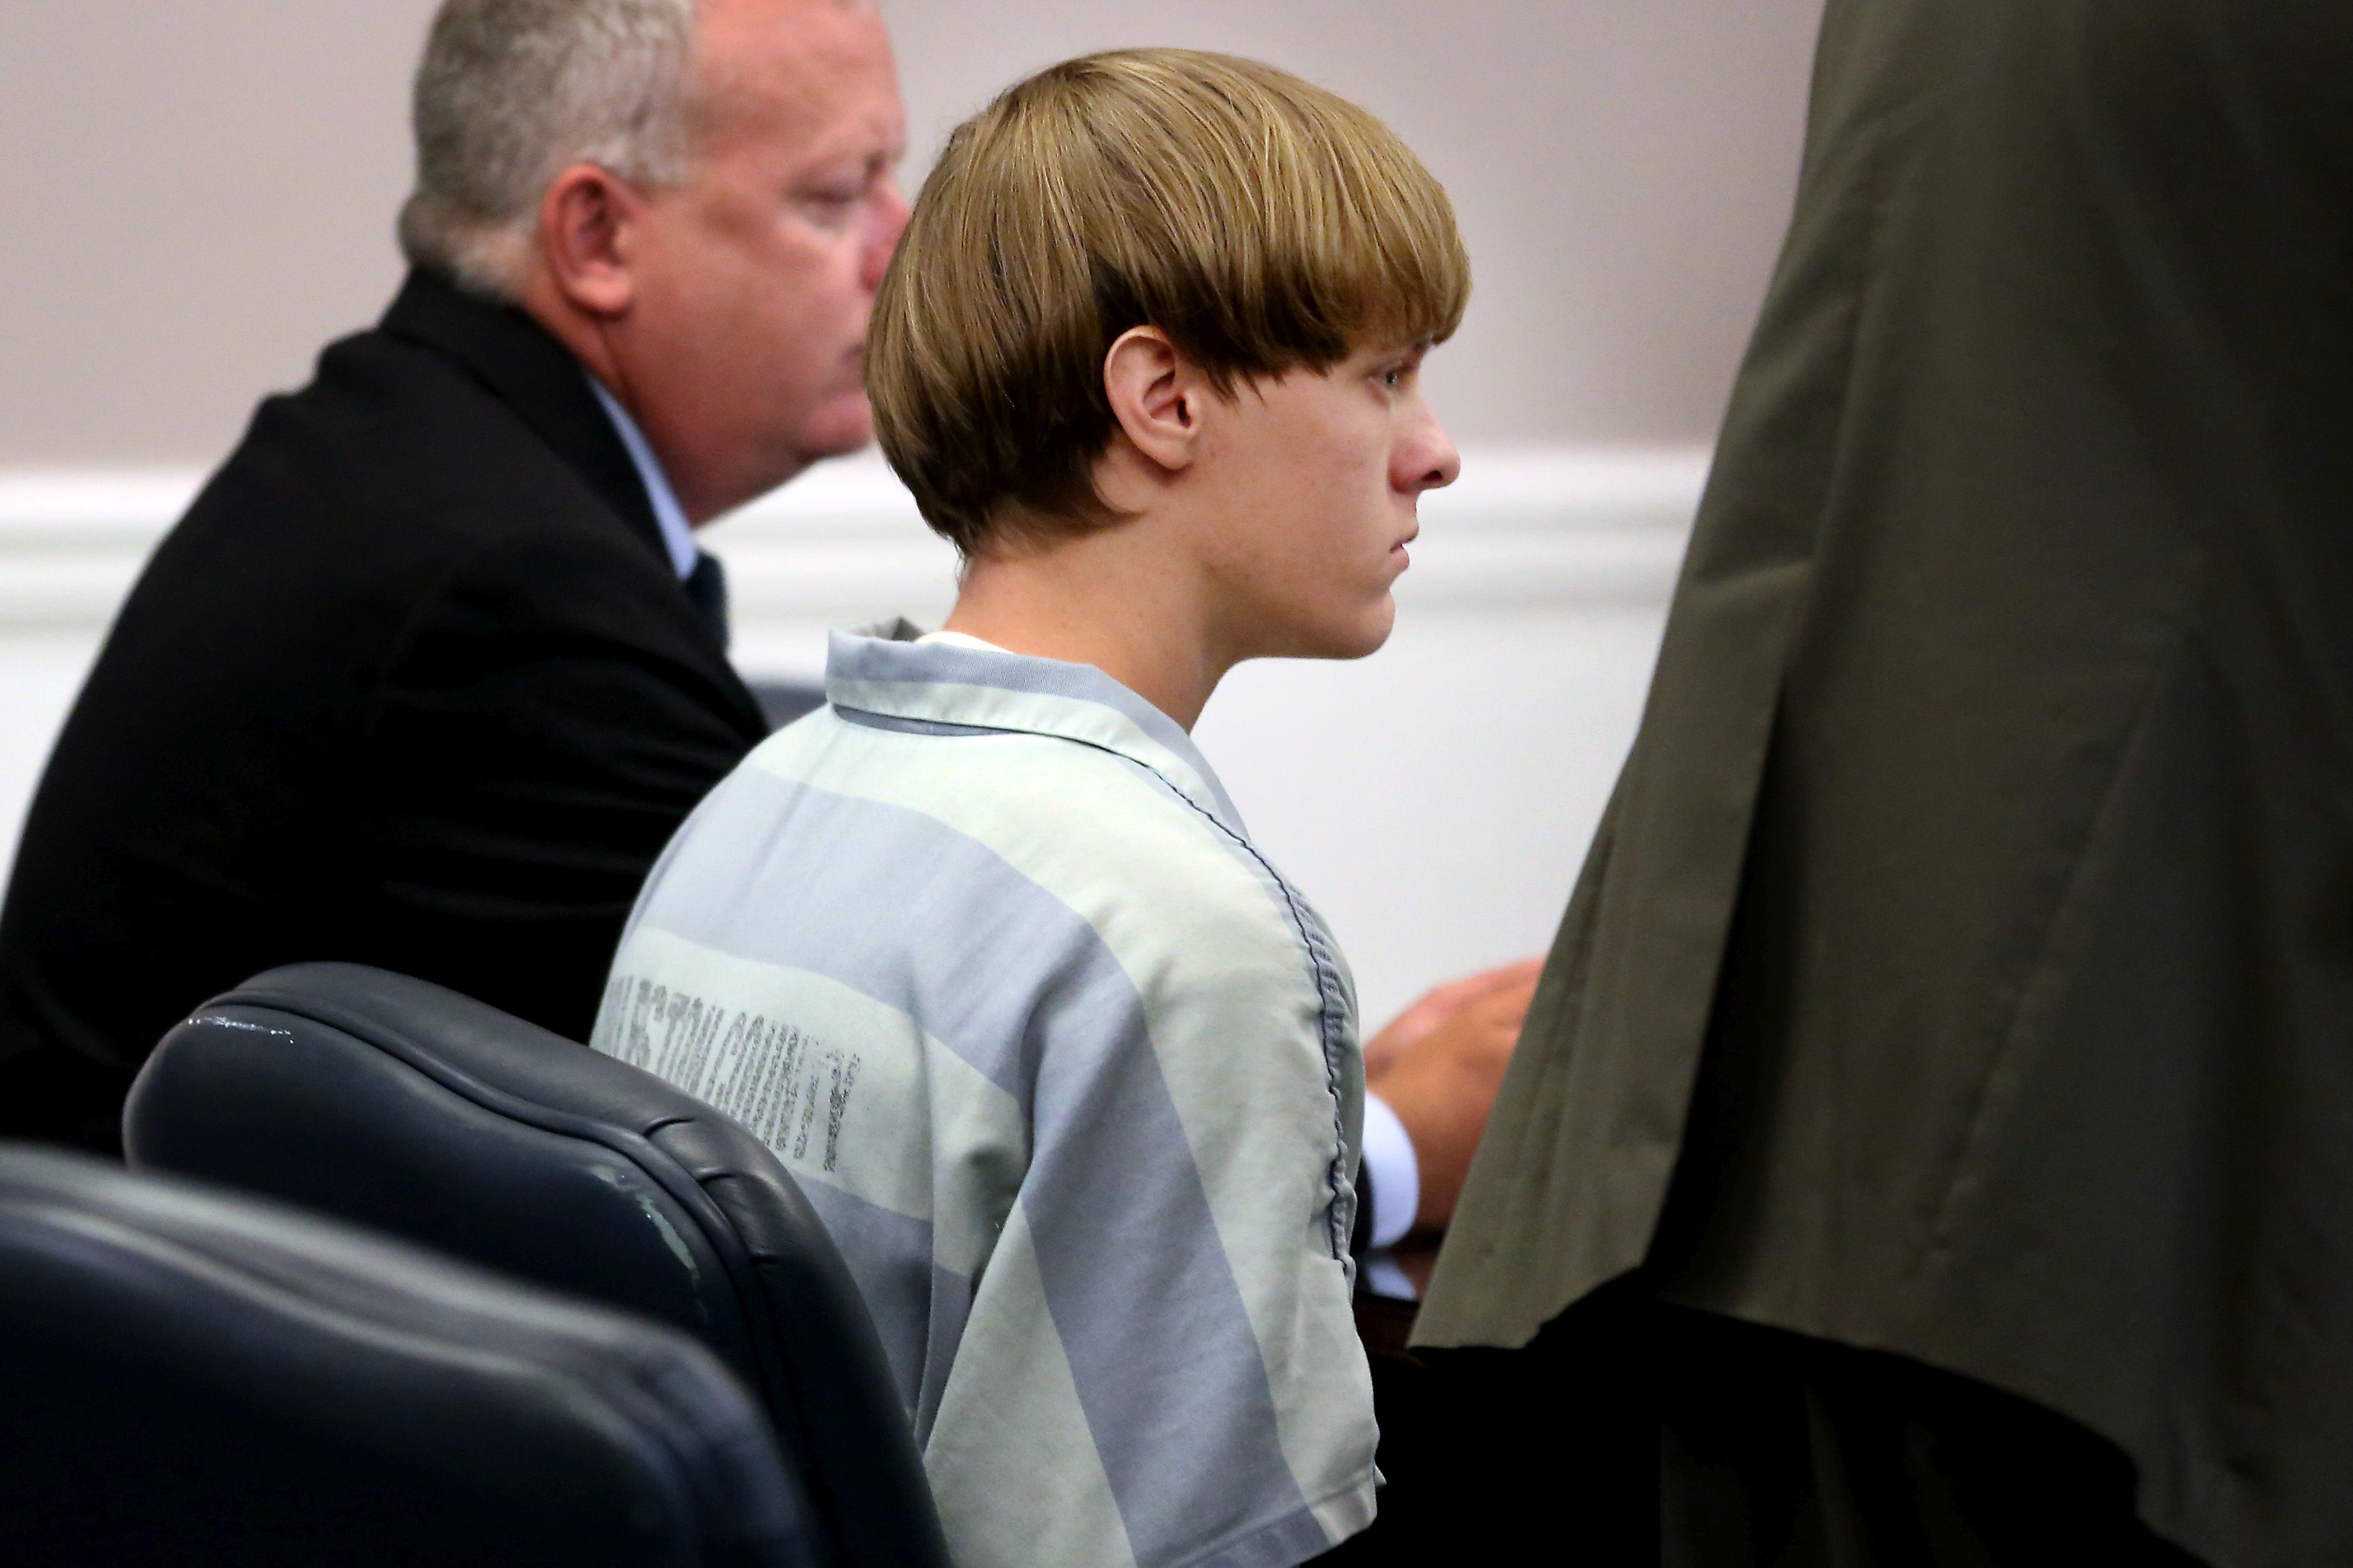 Dylan Roof In Court Over Judge's Gag Order